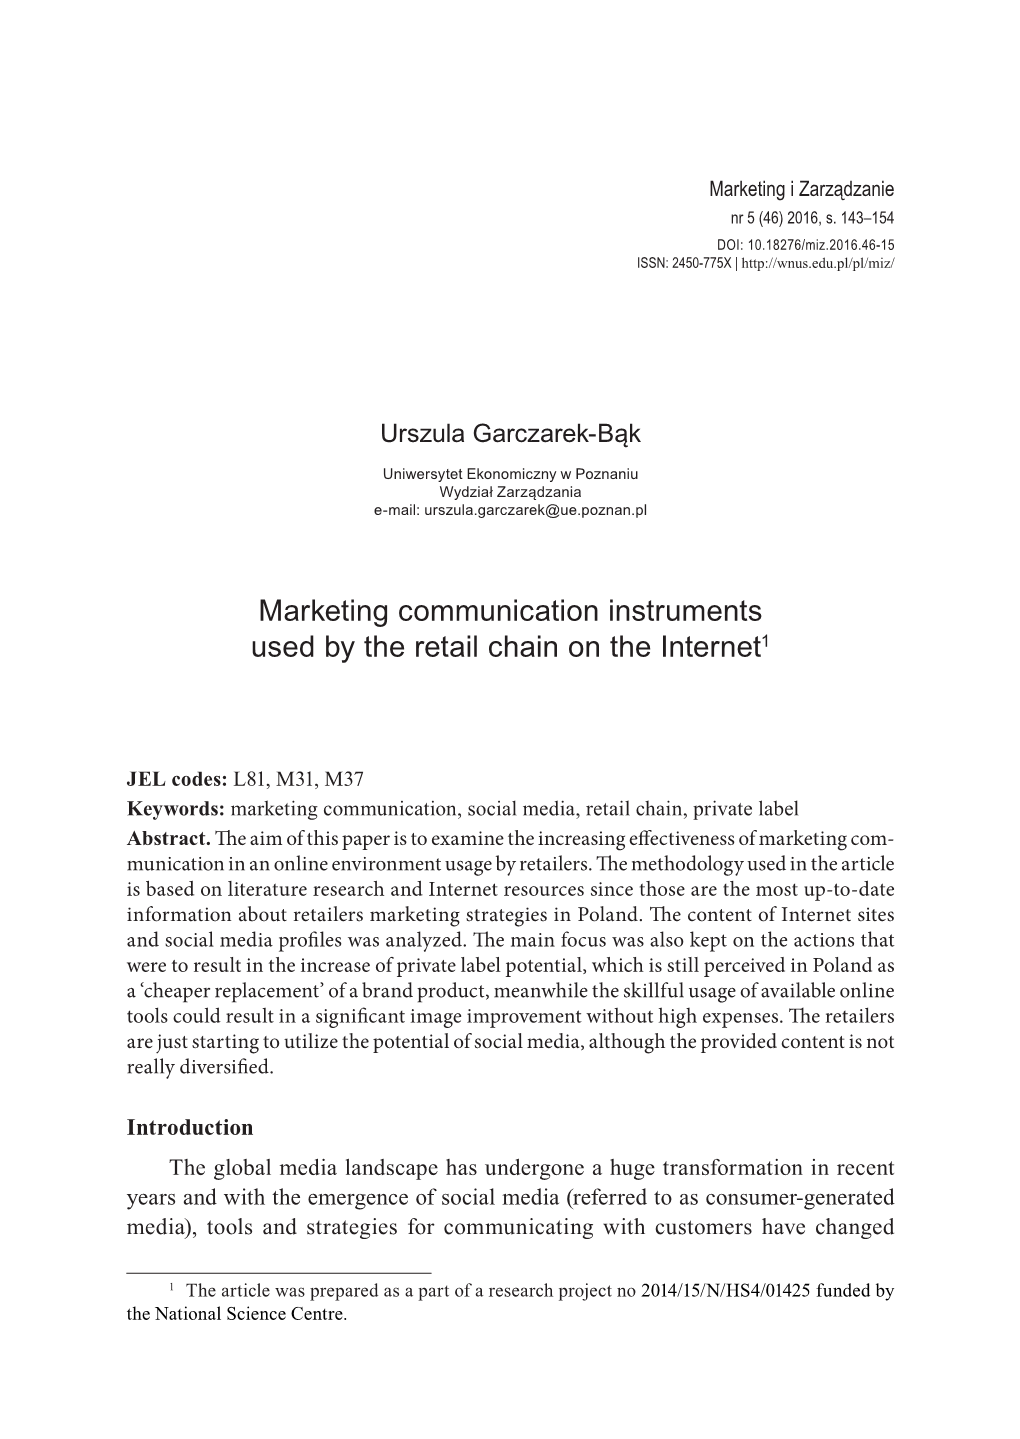 Marketing Communication Instruments Used by the Retail Chain on the Internet1